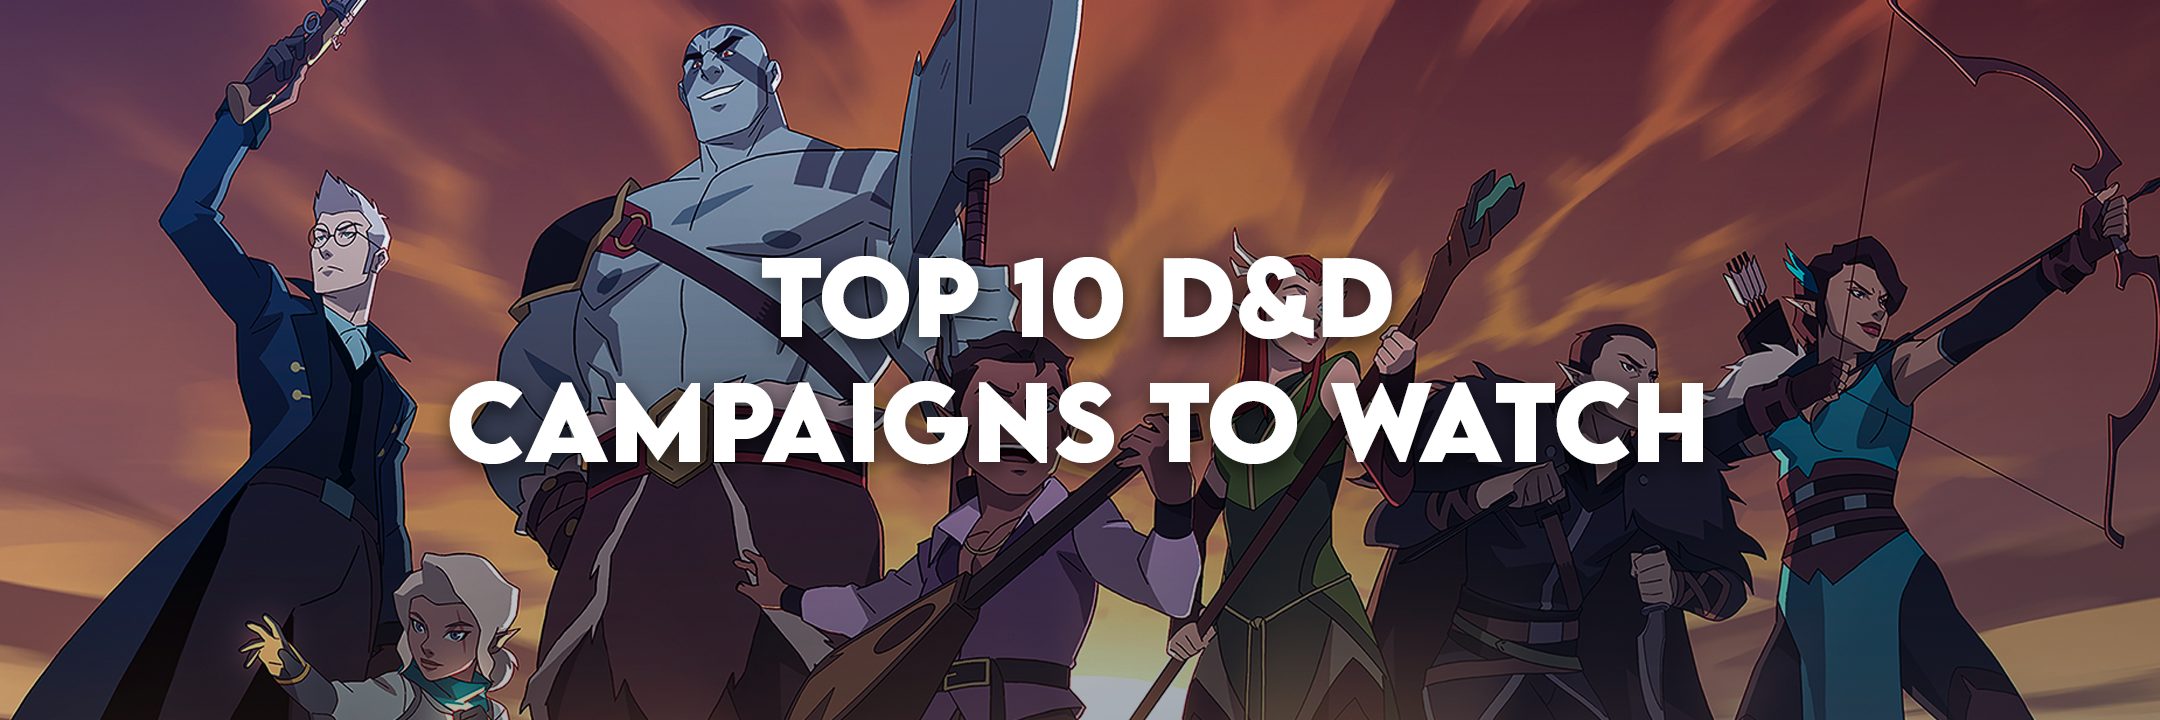 Top 10 D&D campaigns to watch on  and Twitch